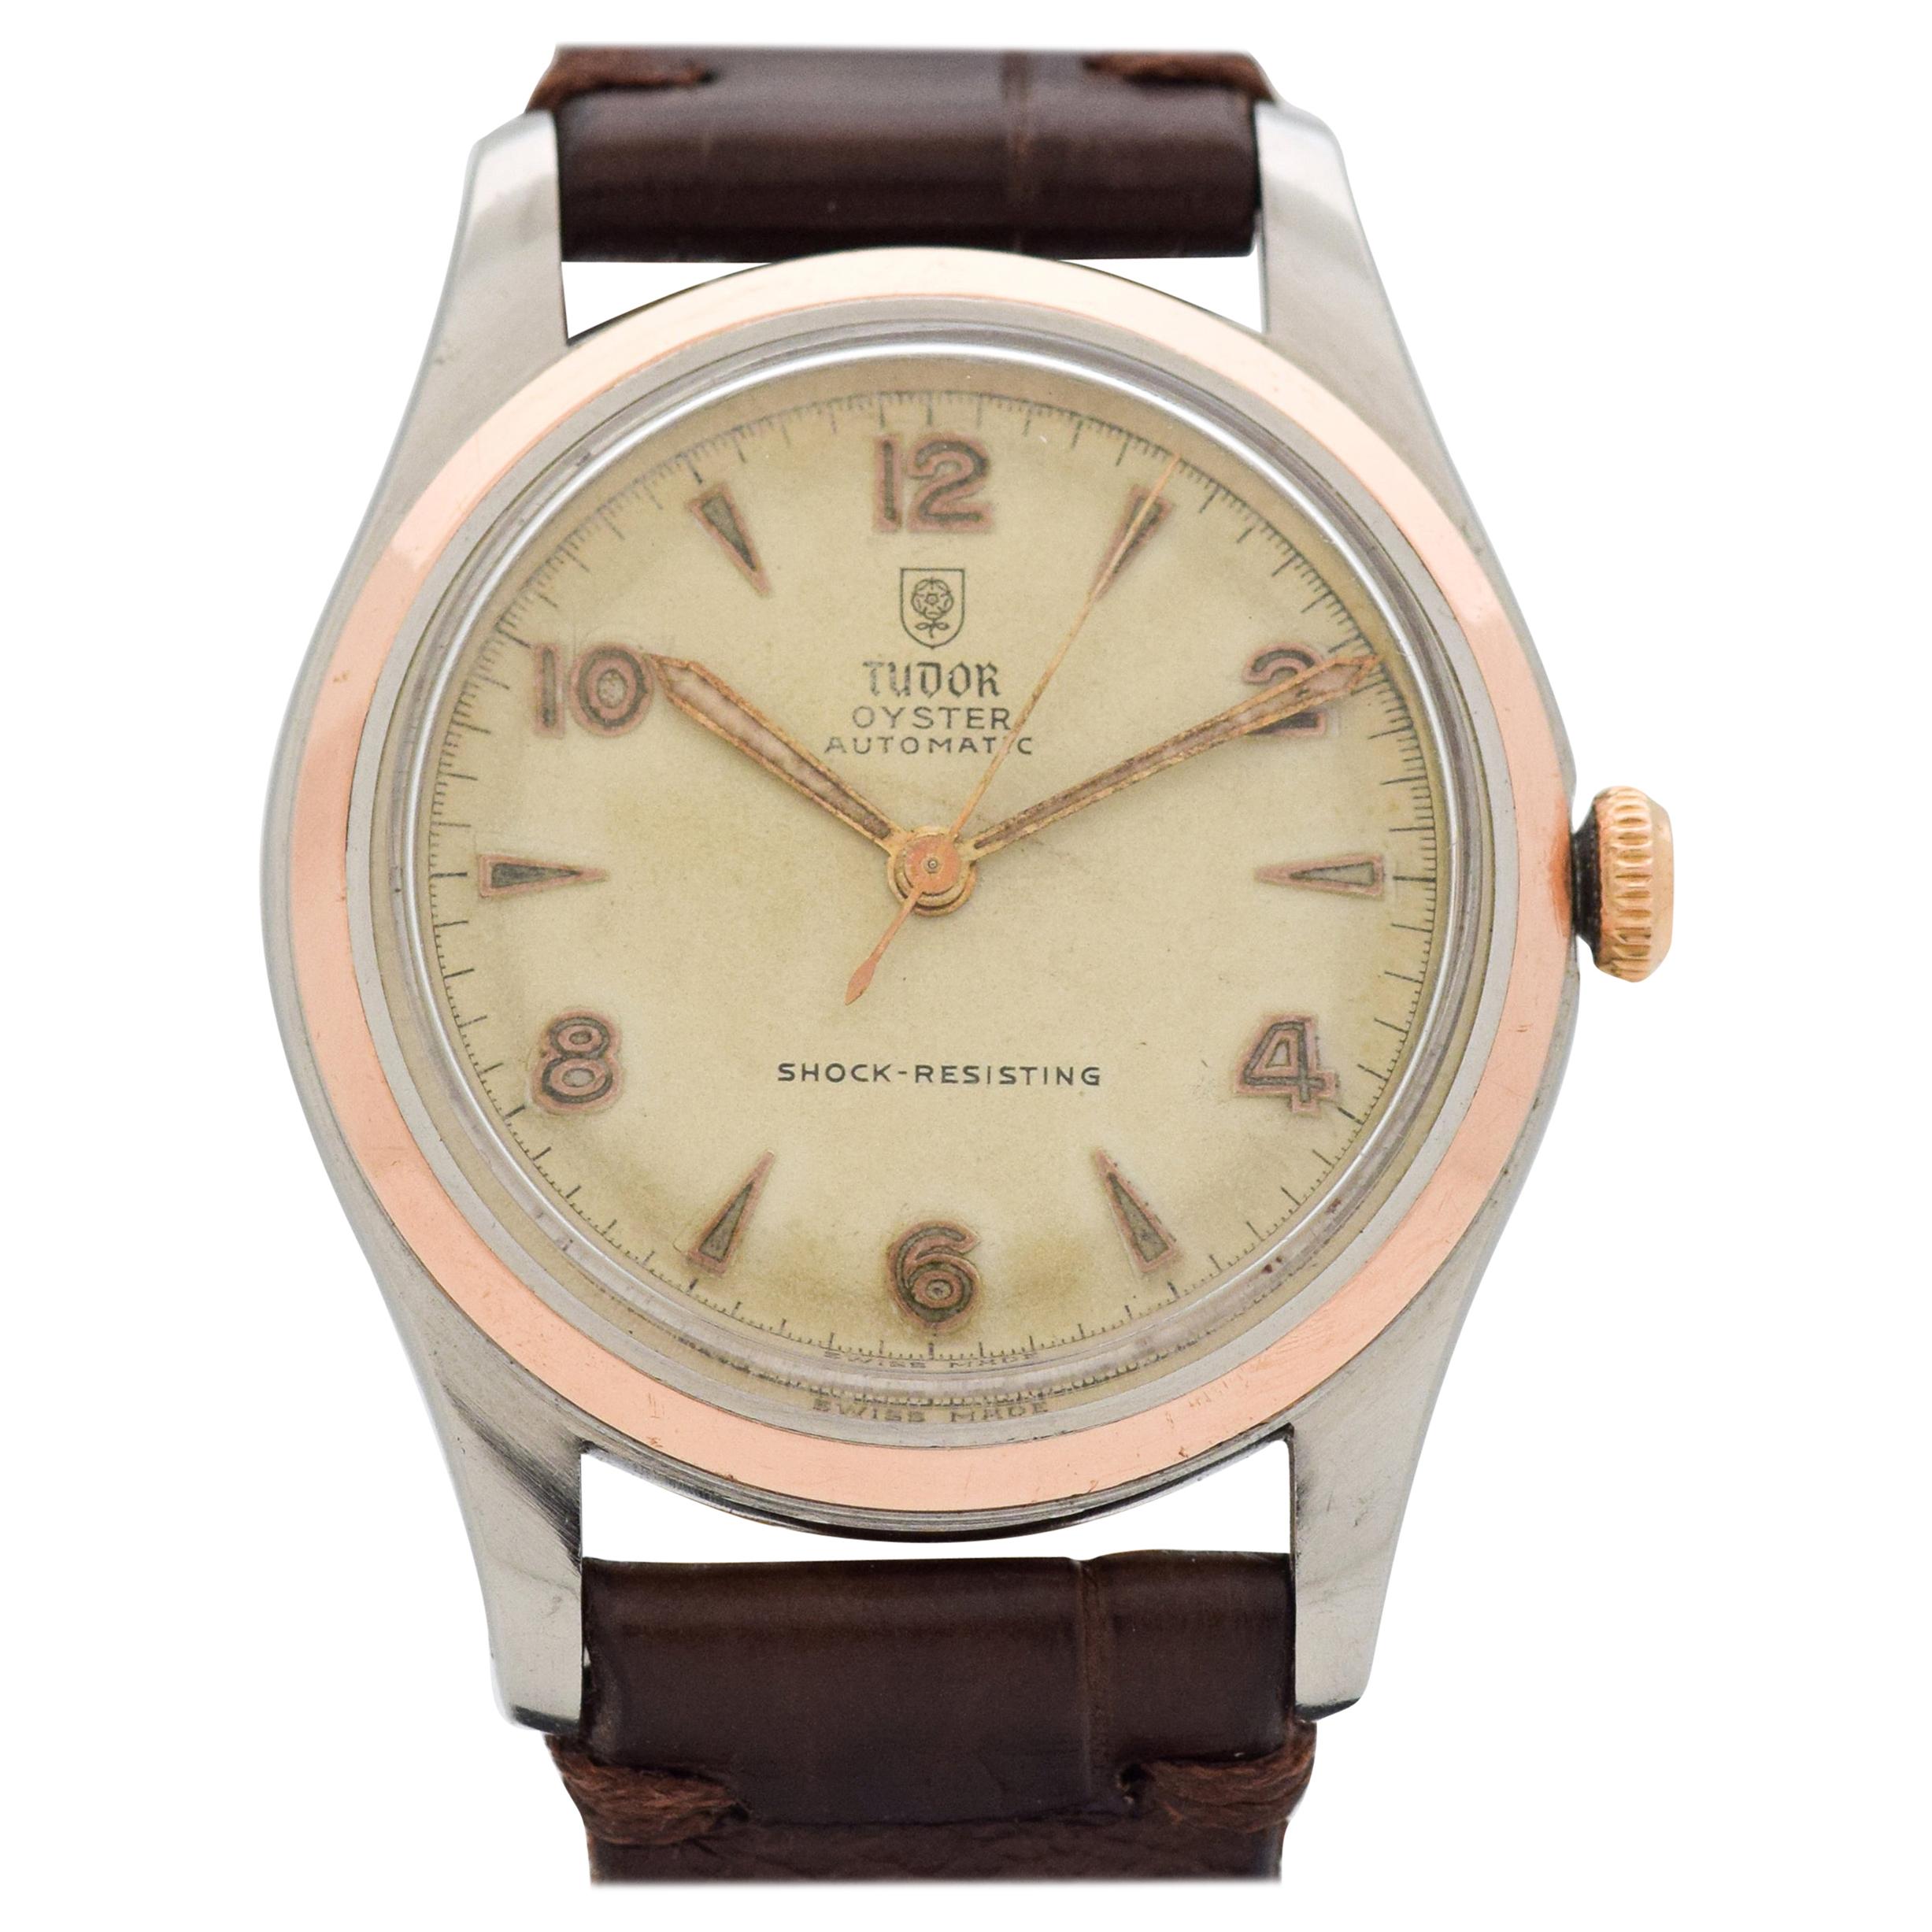 Vintage Tudor Oyster 14 Karat Rose Gold and Stainless Steel Watch, 1964 For Sale